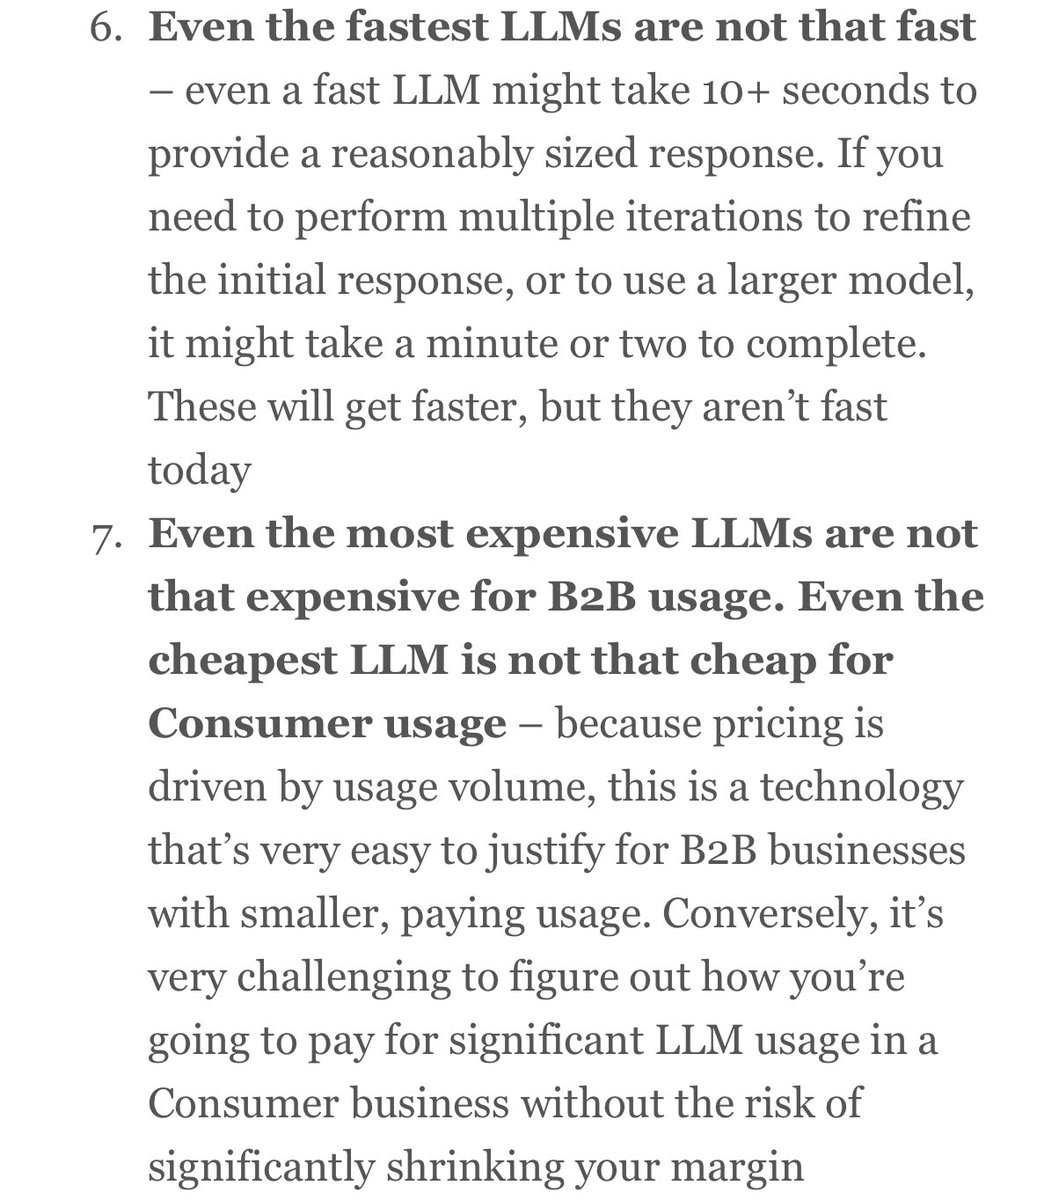 Wrote some notes on using LLMs in products, and some guidelines to avoid some of the misleading mental models I hear some folks developing.